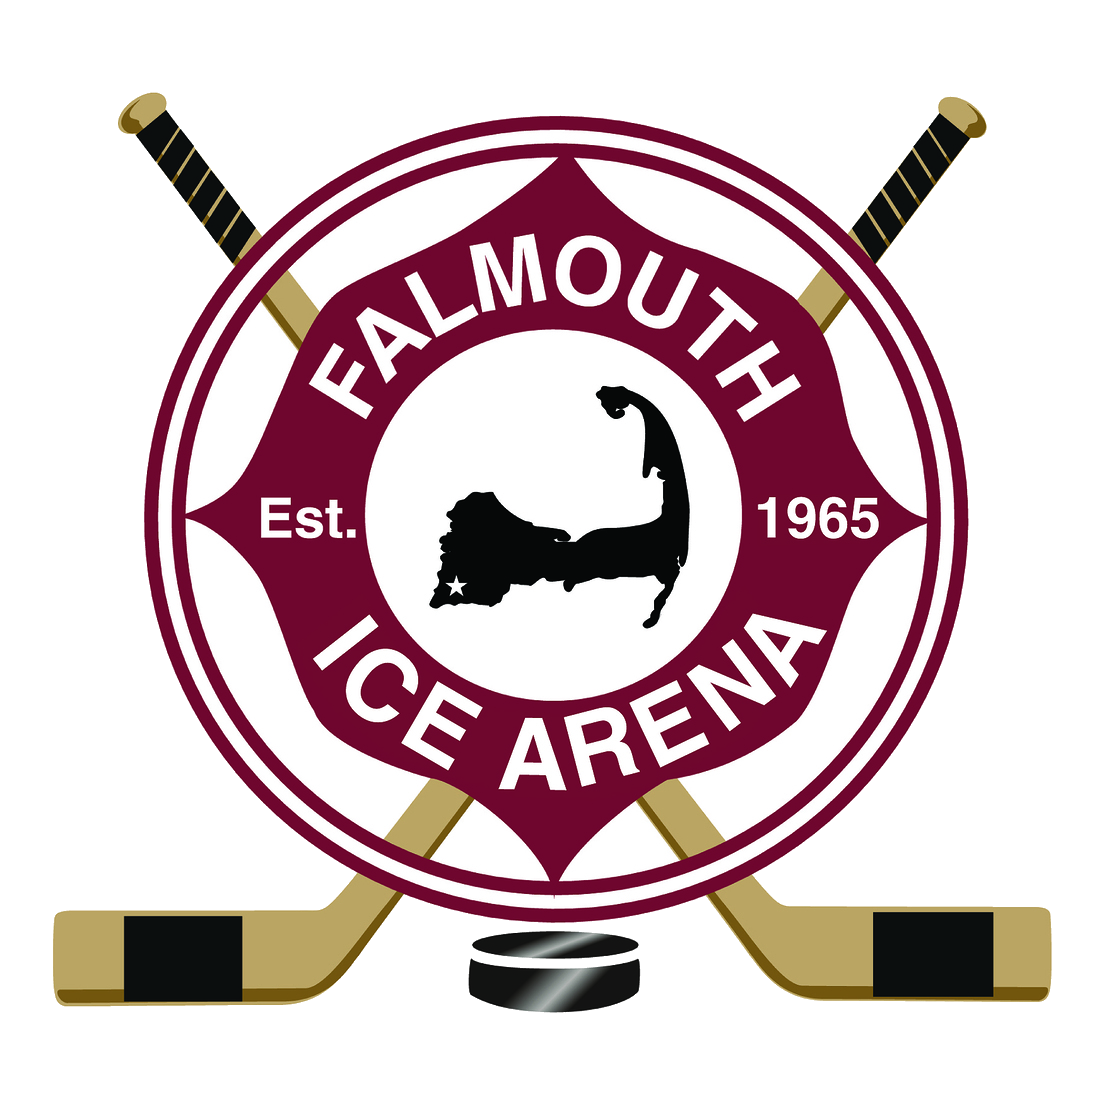 falmouth-ice-arena-online-booking